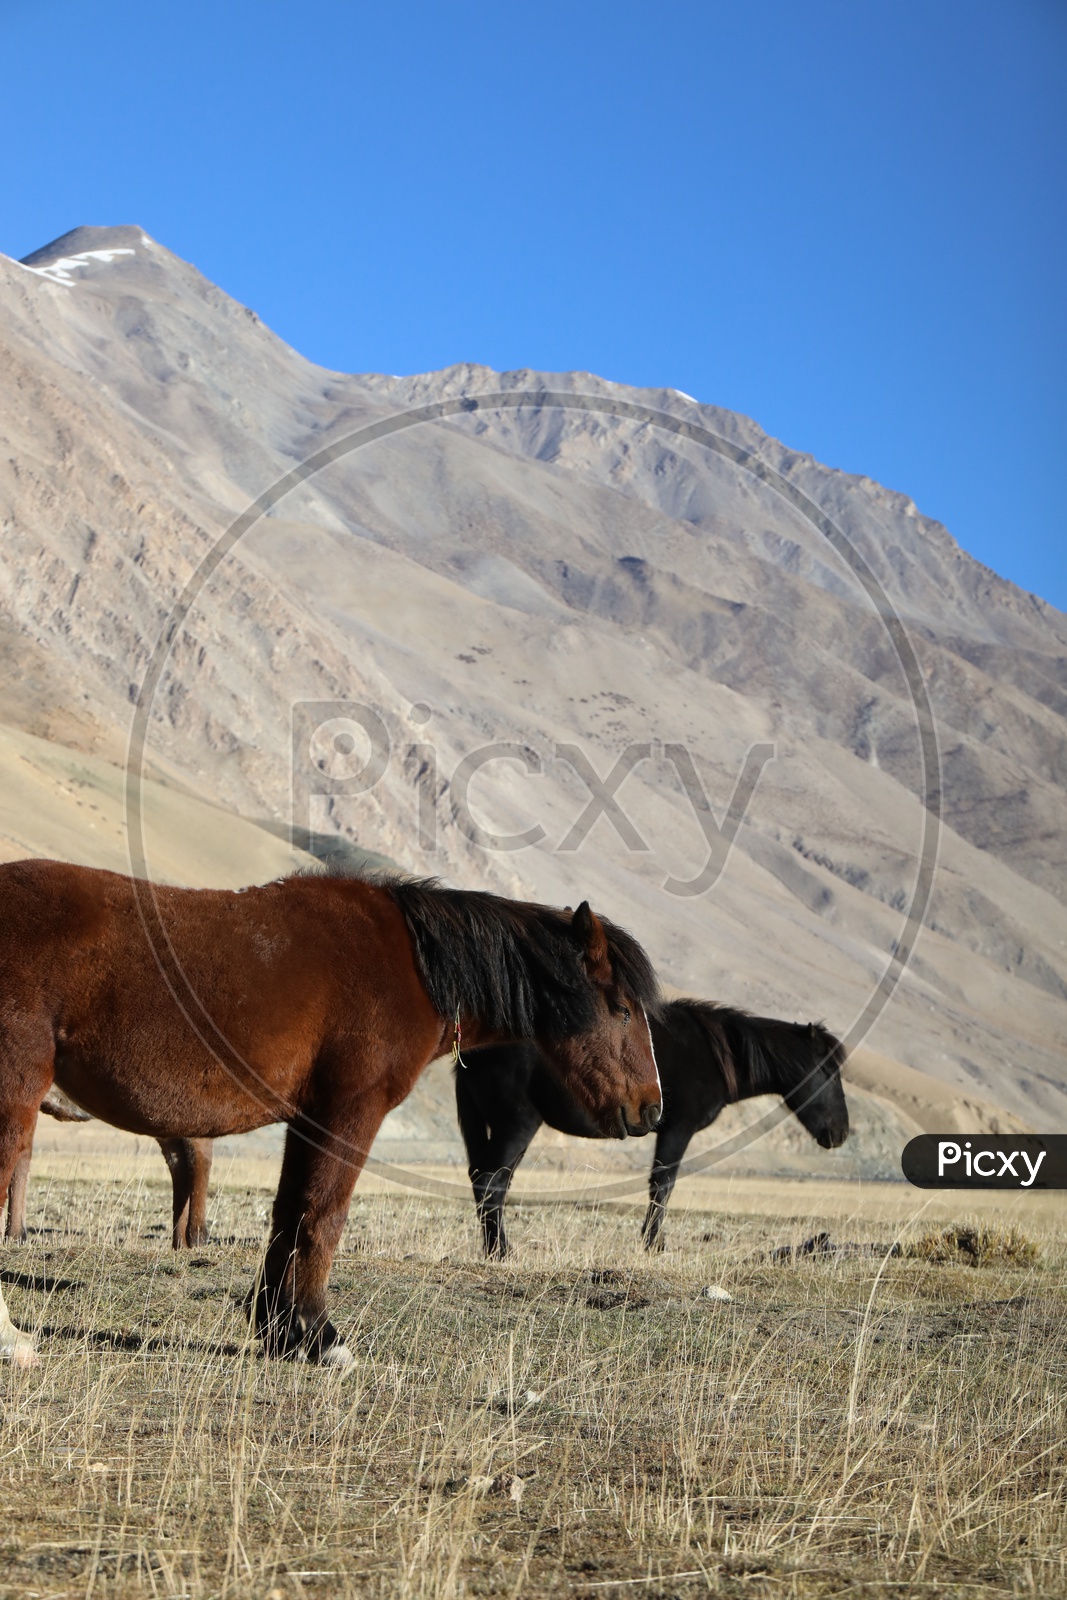 Horses Feeding In the River Valleys Of Leh With Sand Dunes In The Background